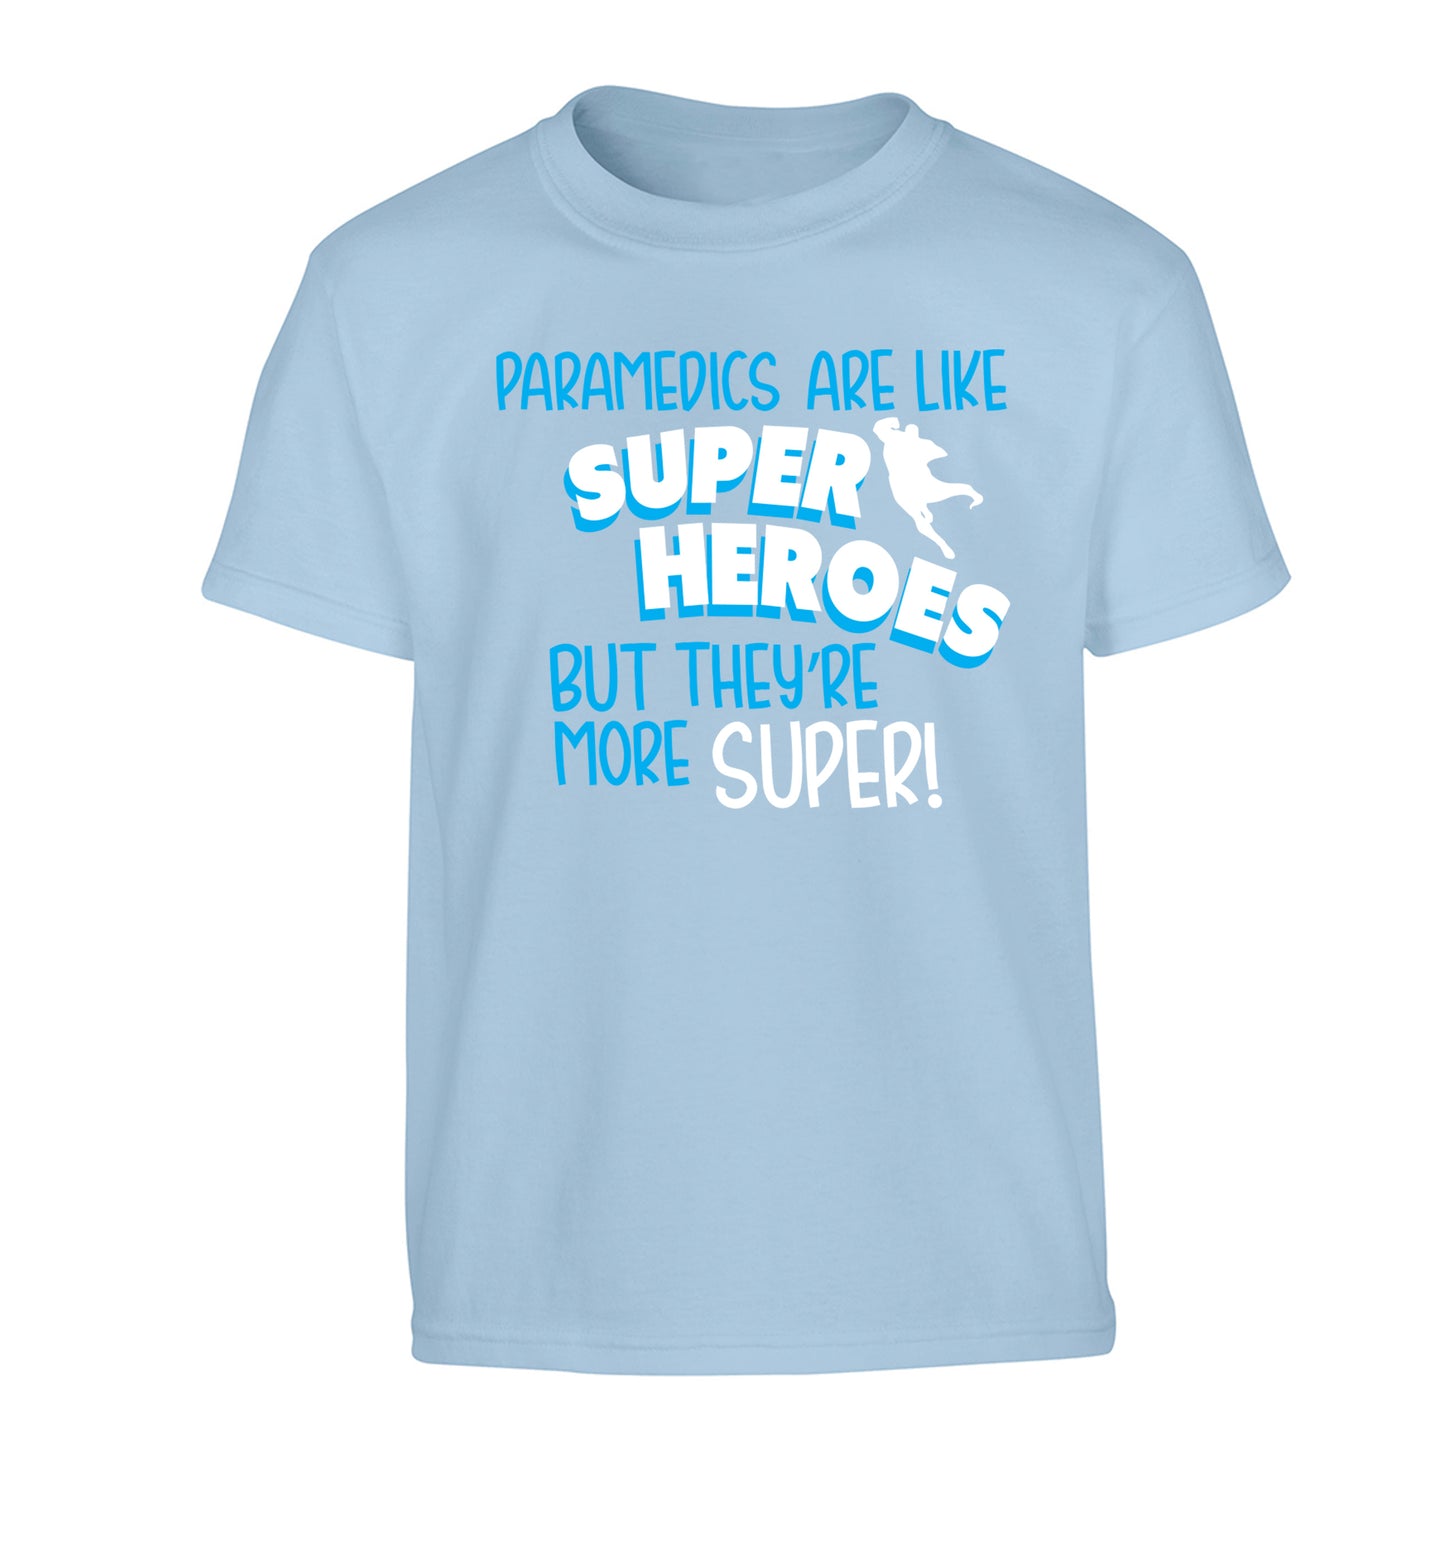 Paramedics are like superheros but they're more super Children's light blue Tshirt 12-13 Years